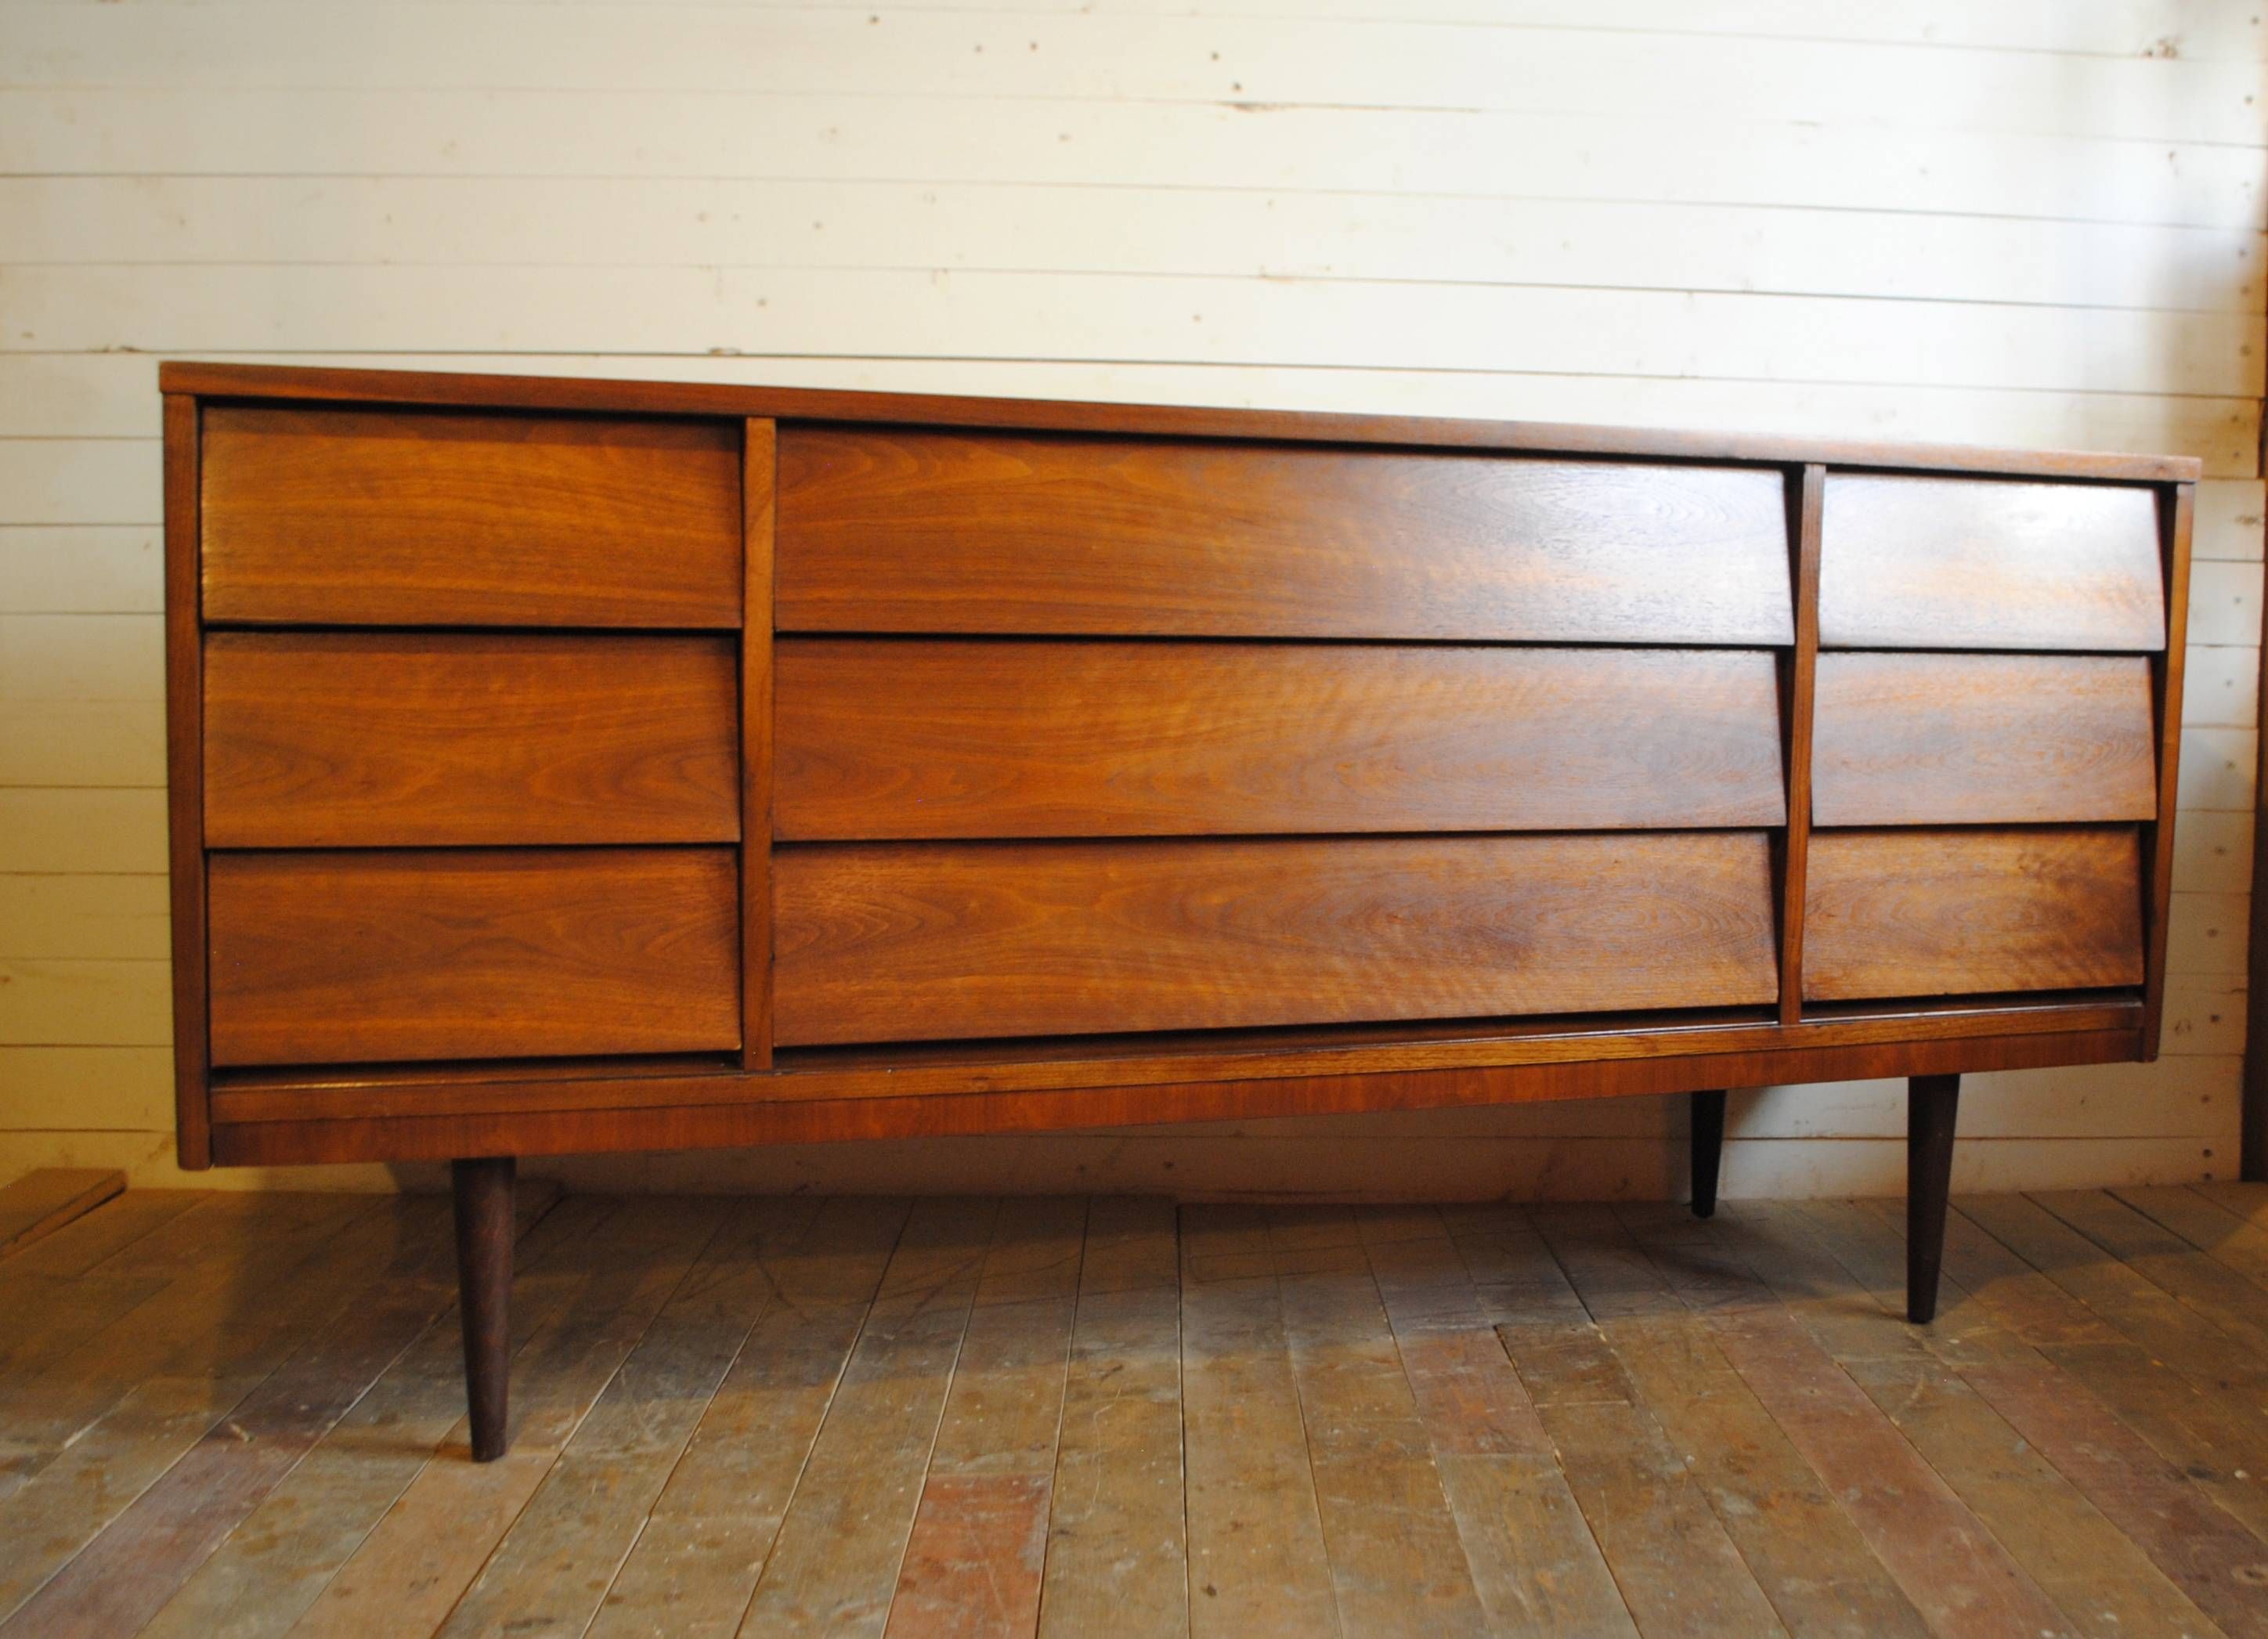 Credenzas And Sideboards Best Of At Modern Credenzas Sideboards Regarding Mid Century Sideboards (View 10 of 15)